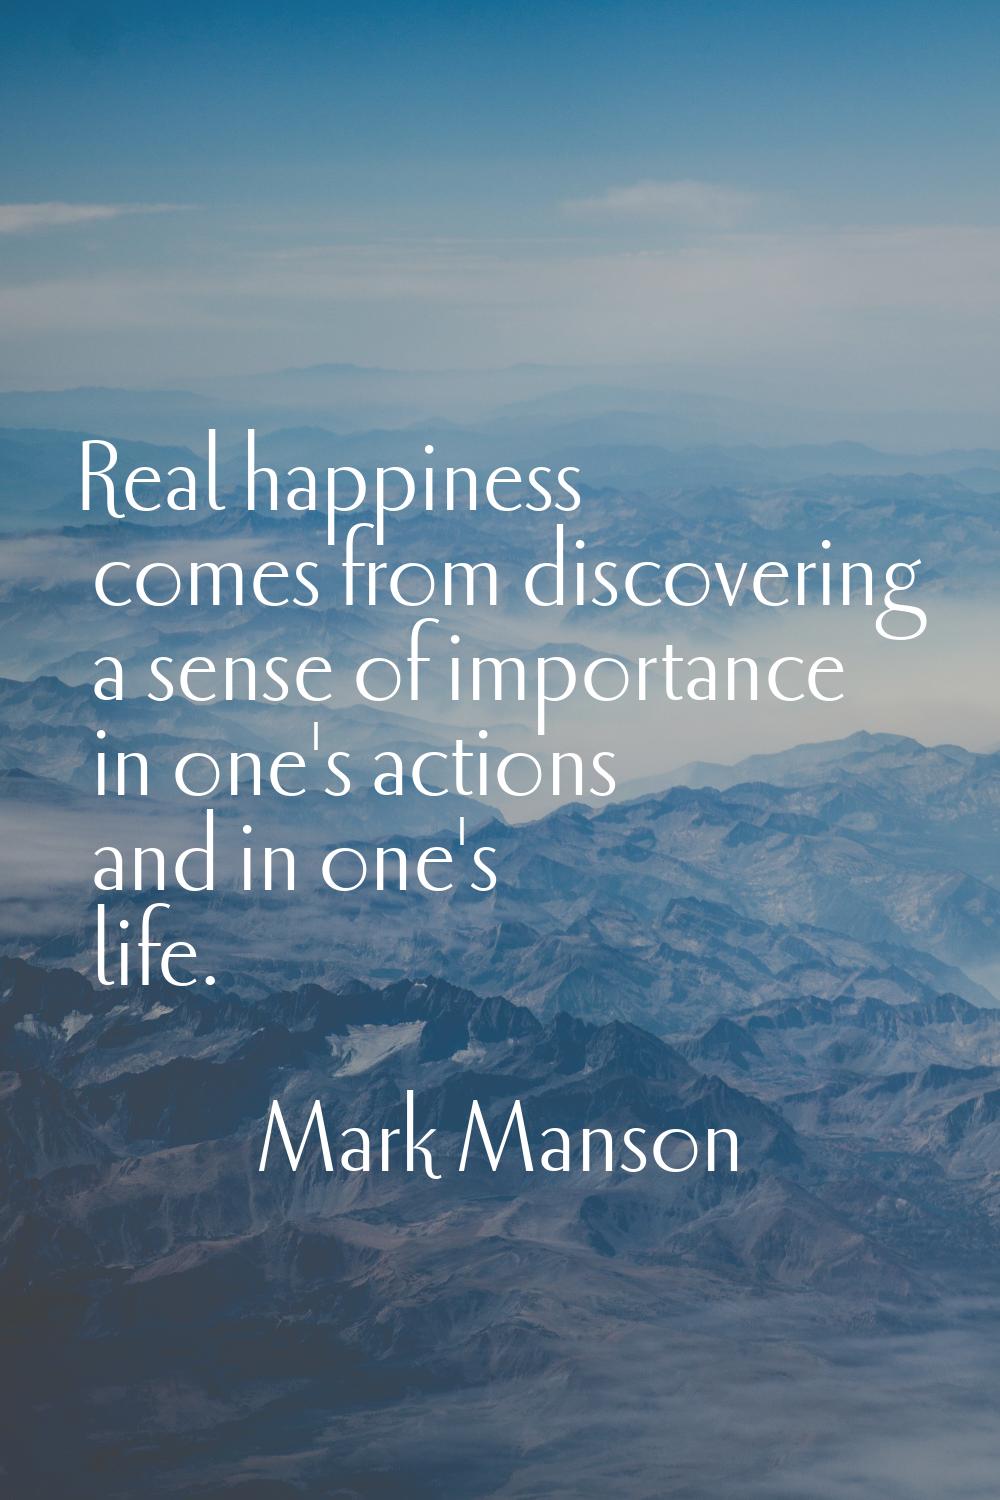 Real happiness comes from discovering a sense of importance in one's actions and in one's life.